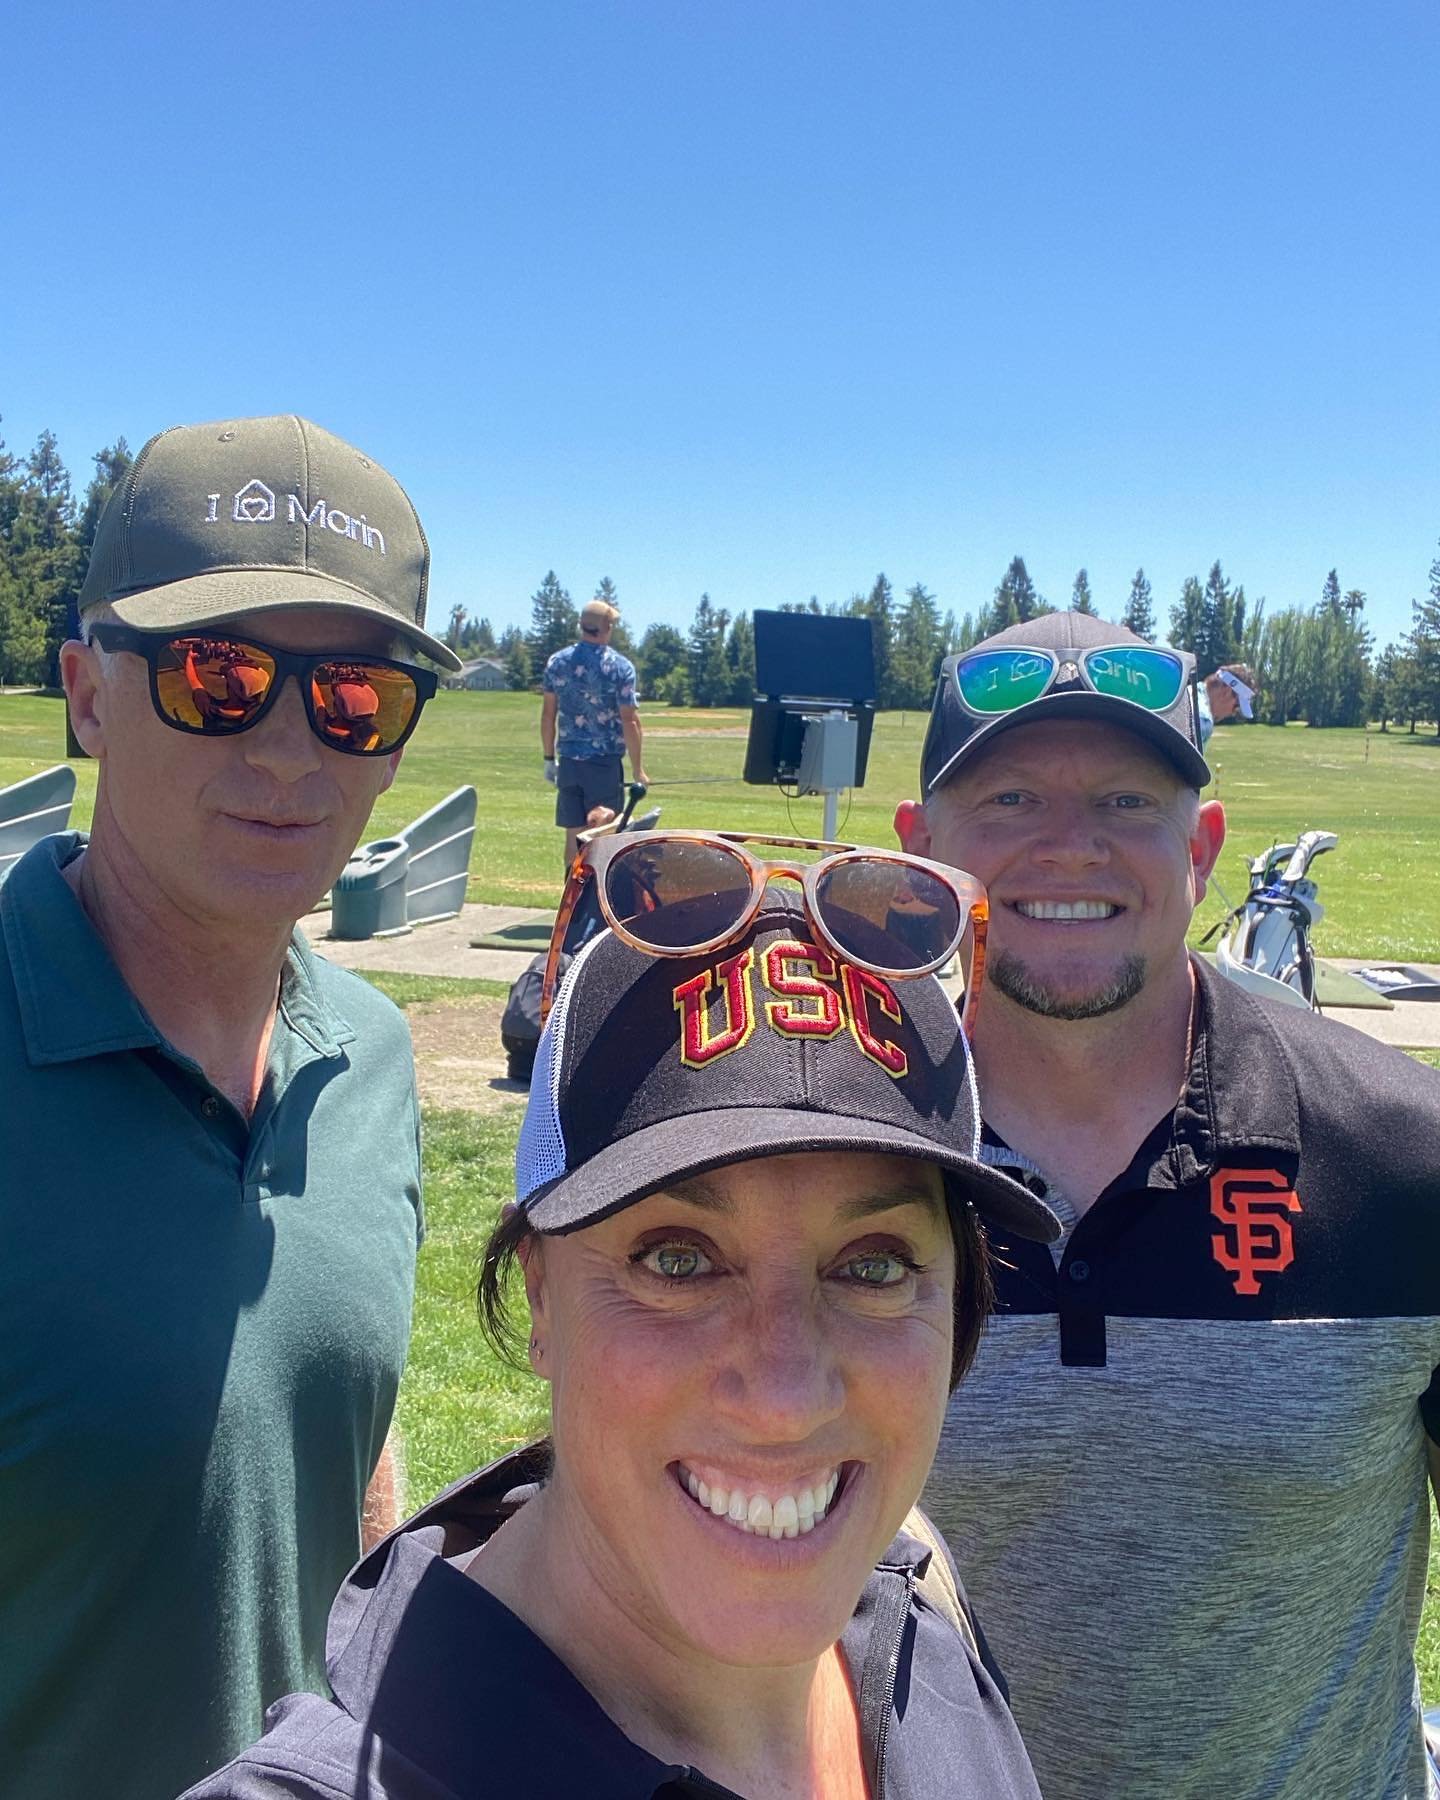 Last Friday, Lanie teed up to represent the McArthur Love Team at the 27th Annual CanDo! and Scotty&rsquo;s Market Golf Tournament. With over 140 golfers joining under the sunny skies at Foxtail Golf Club, it was a day filled with laughter, fun and f